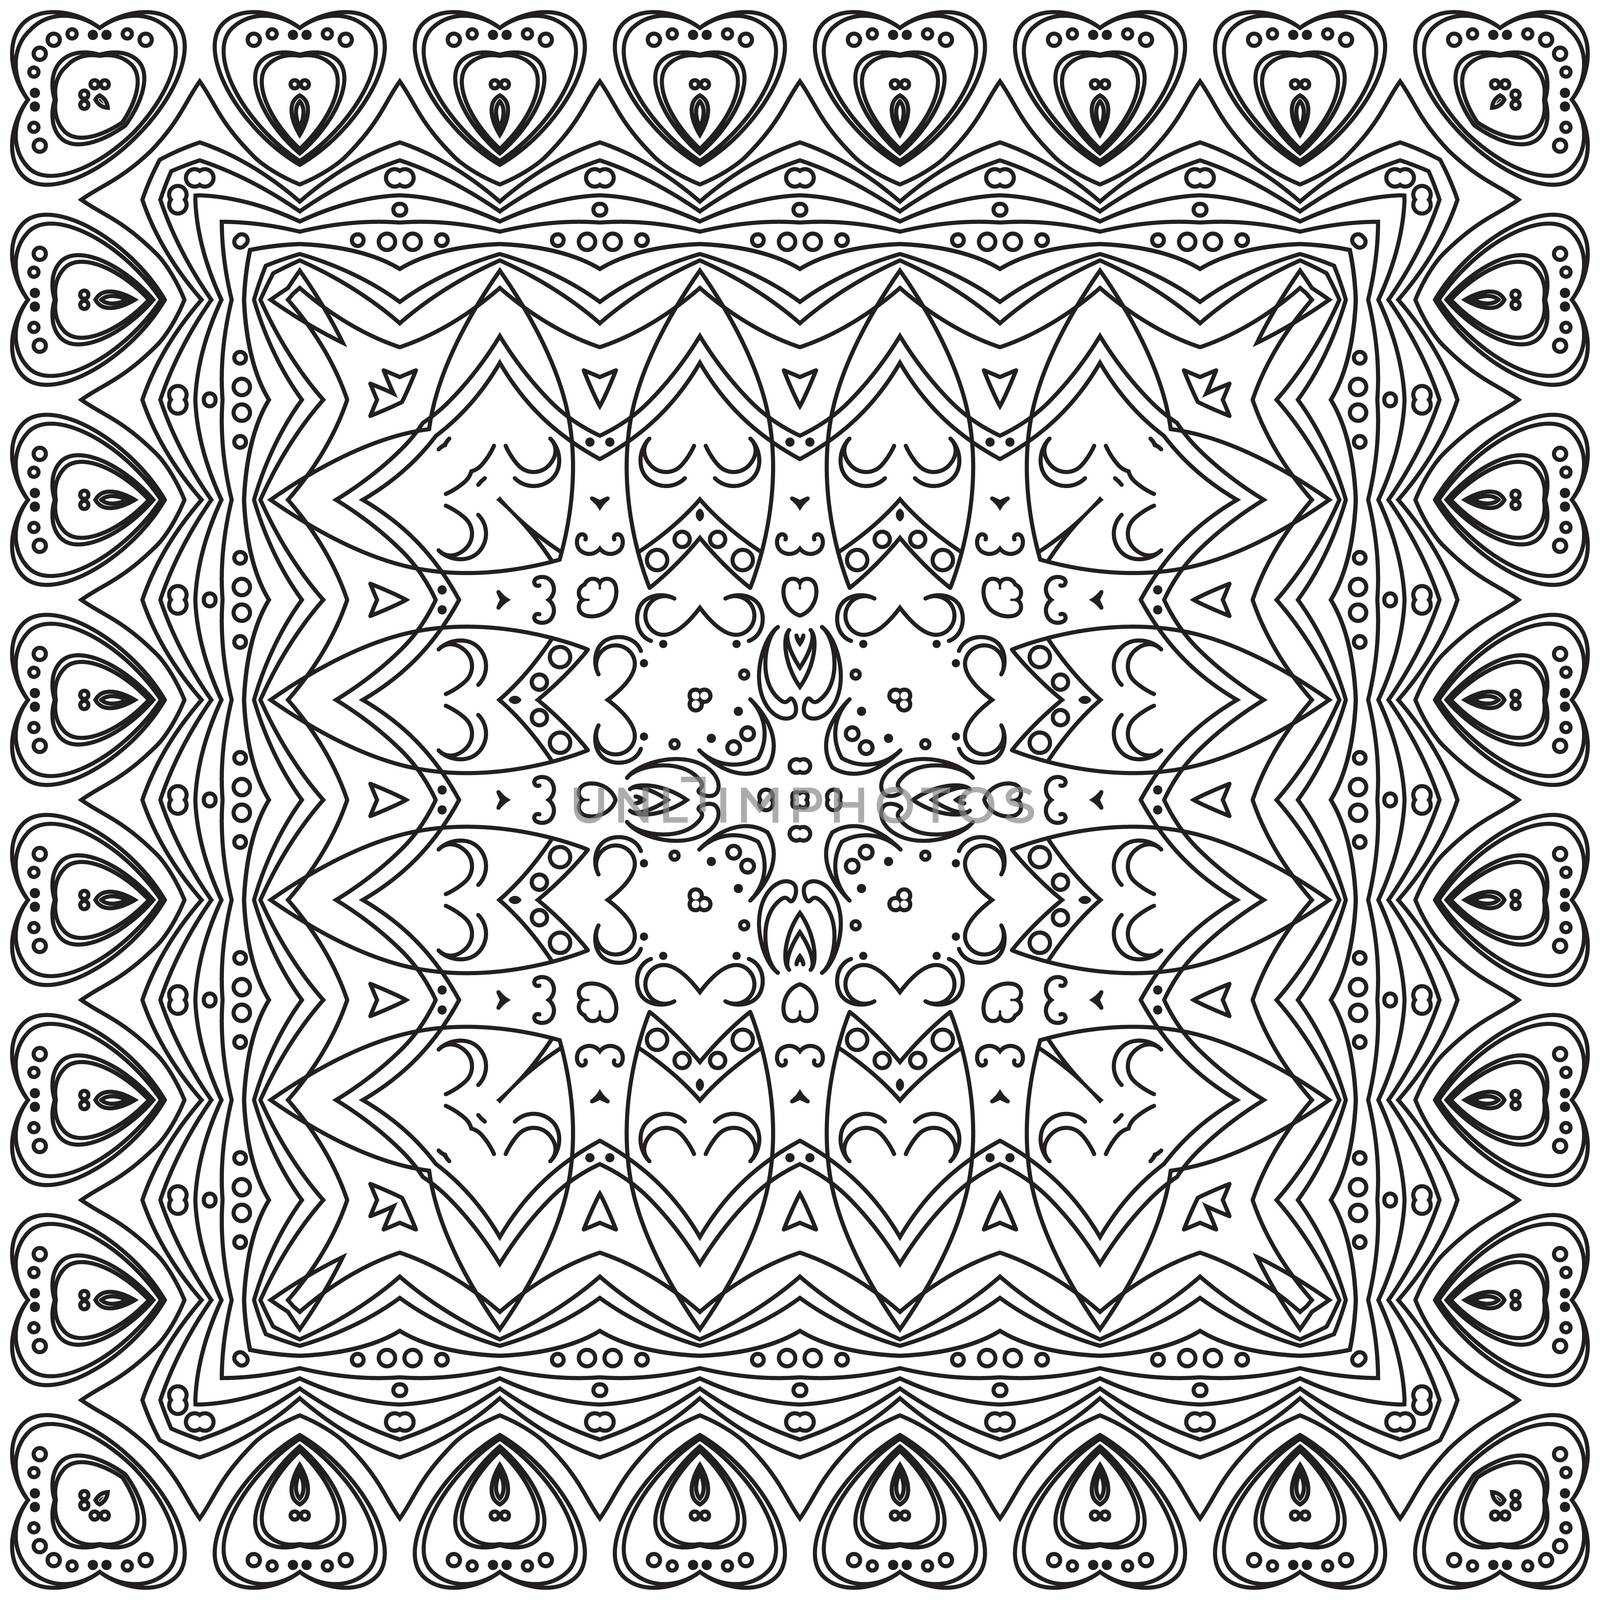 Abstract floral pattern, black contours on white background.